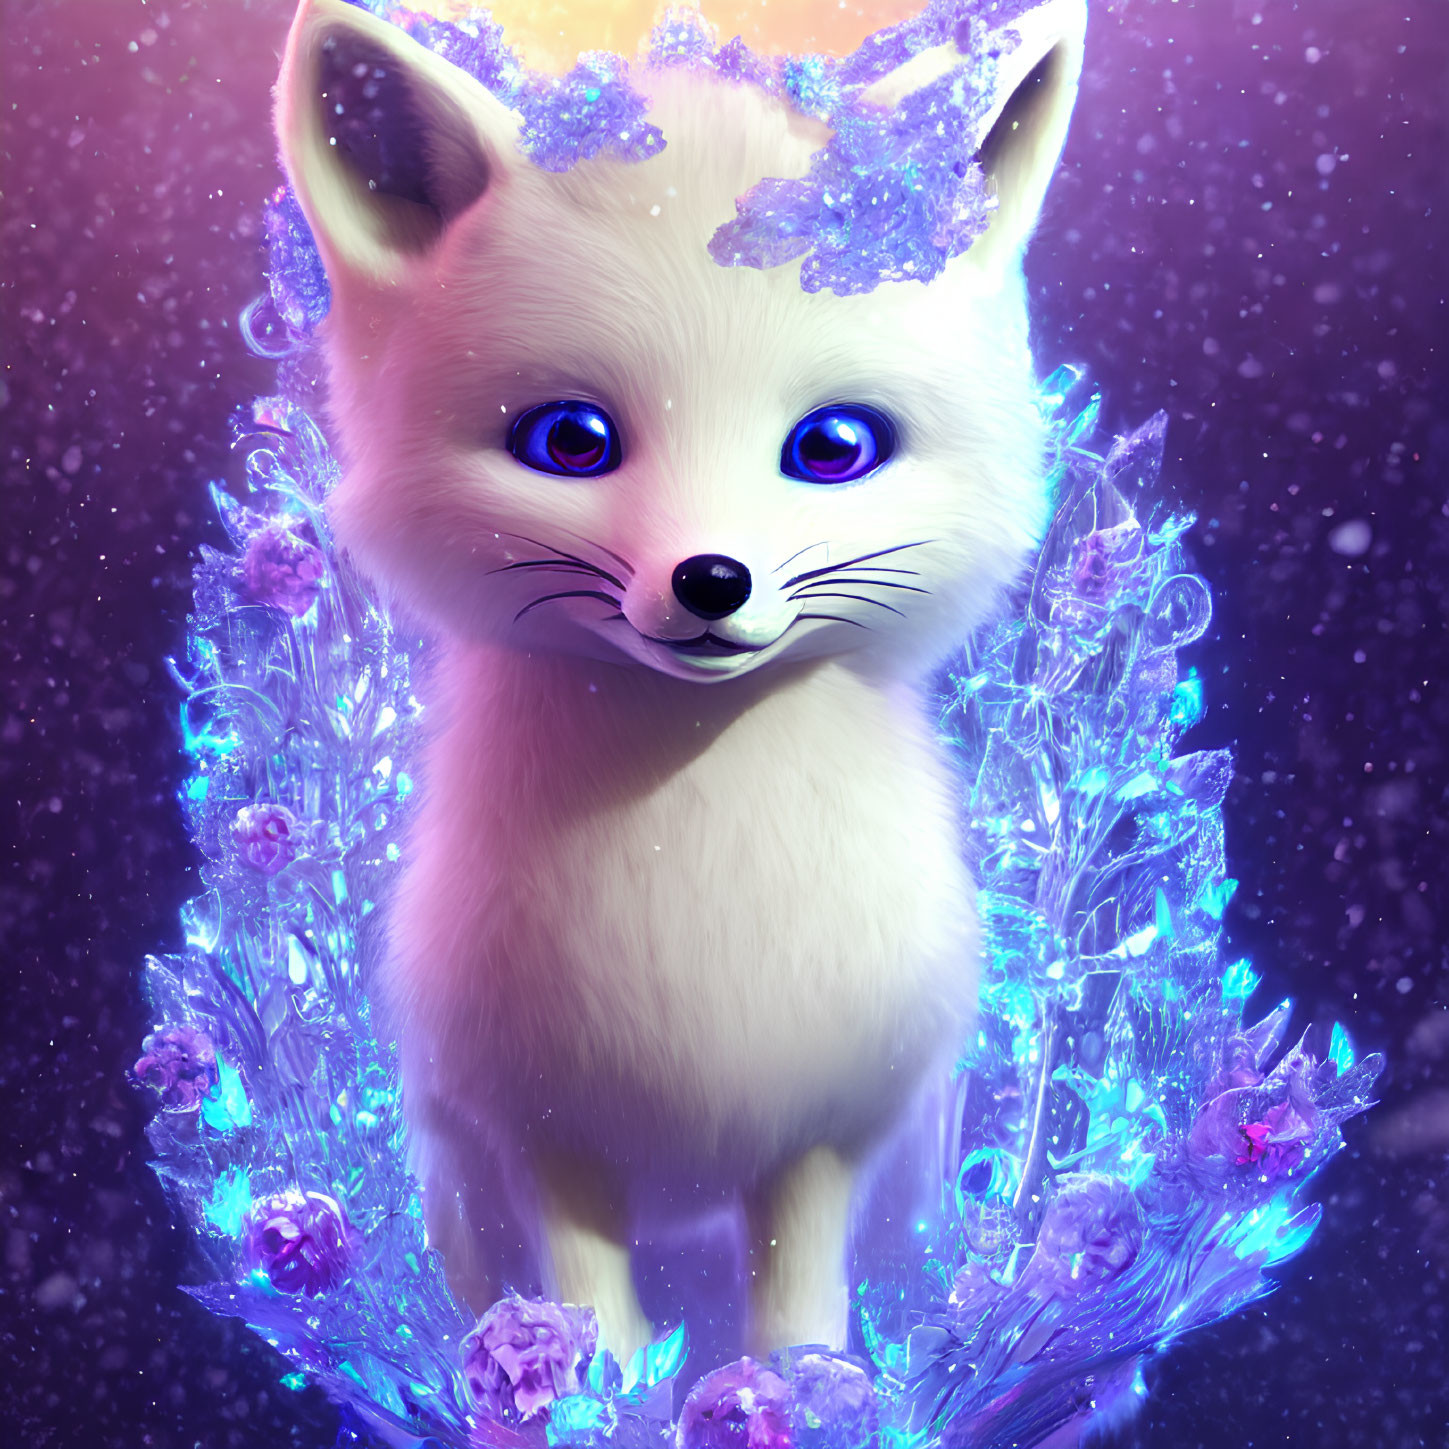 White Fox with Blue Eyes Surrounded by Purple Crystals in Celestial Setting